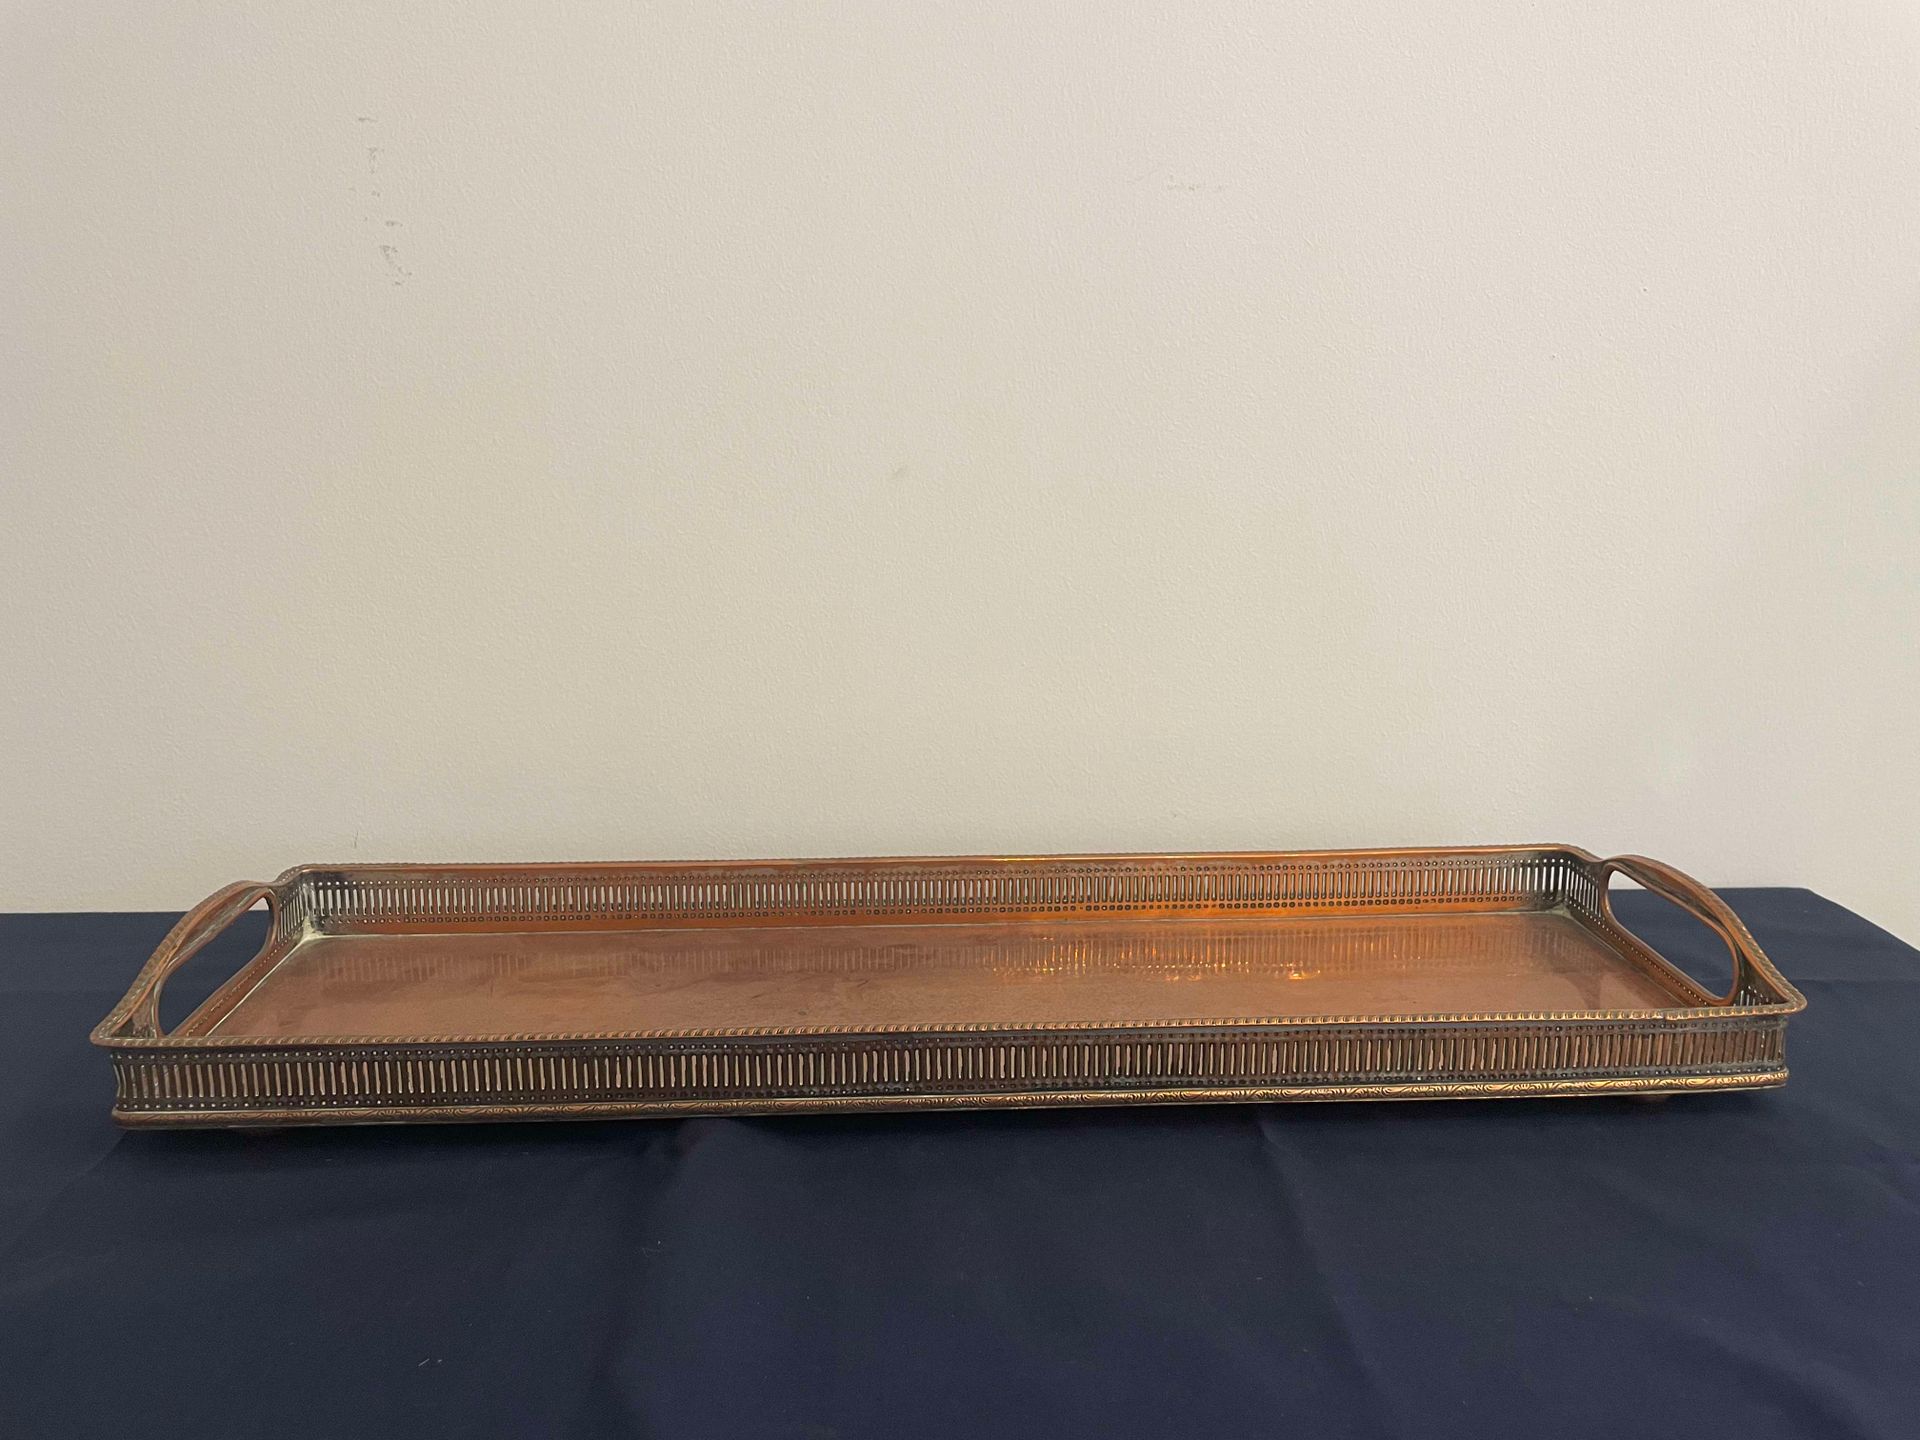 Null Rectangular tray with copper handles

5,5 x 53 x 16,5 cm